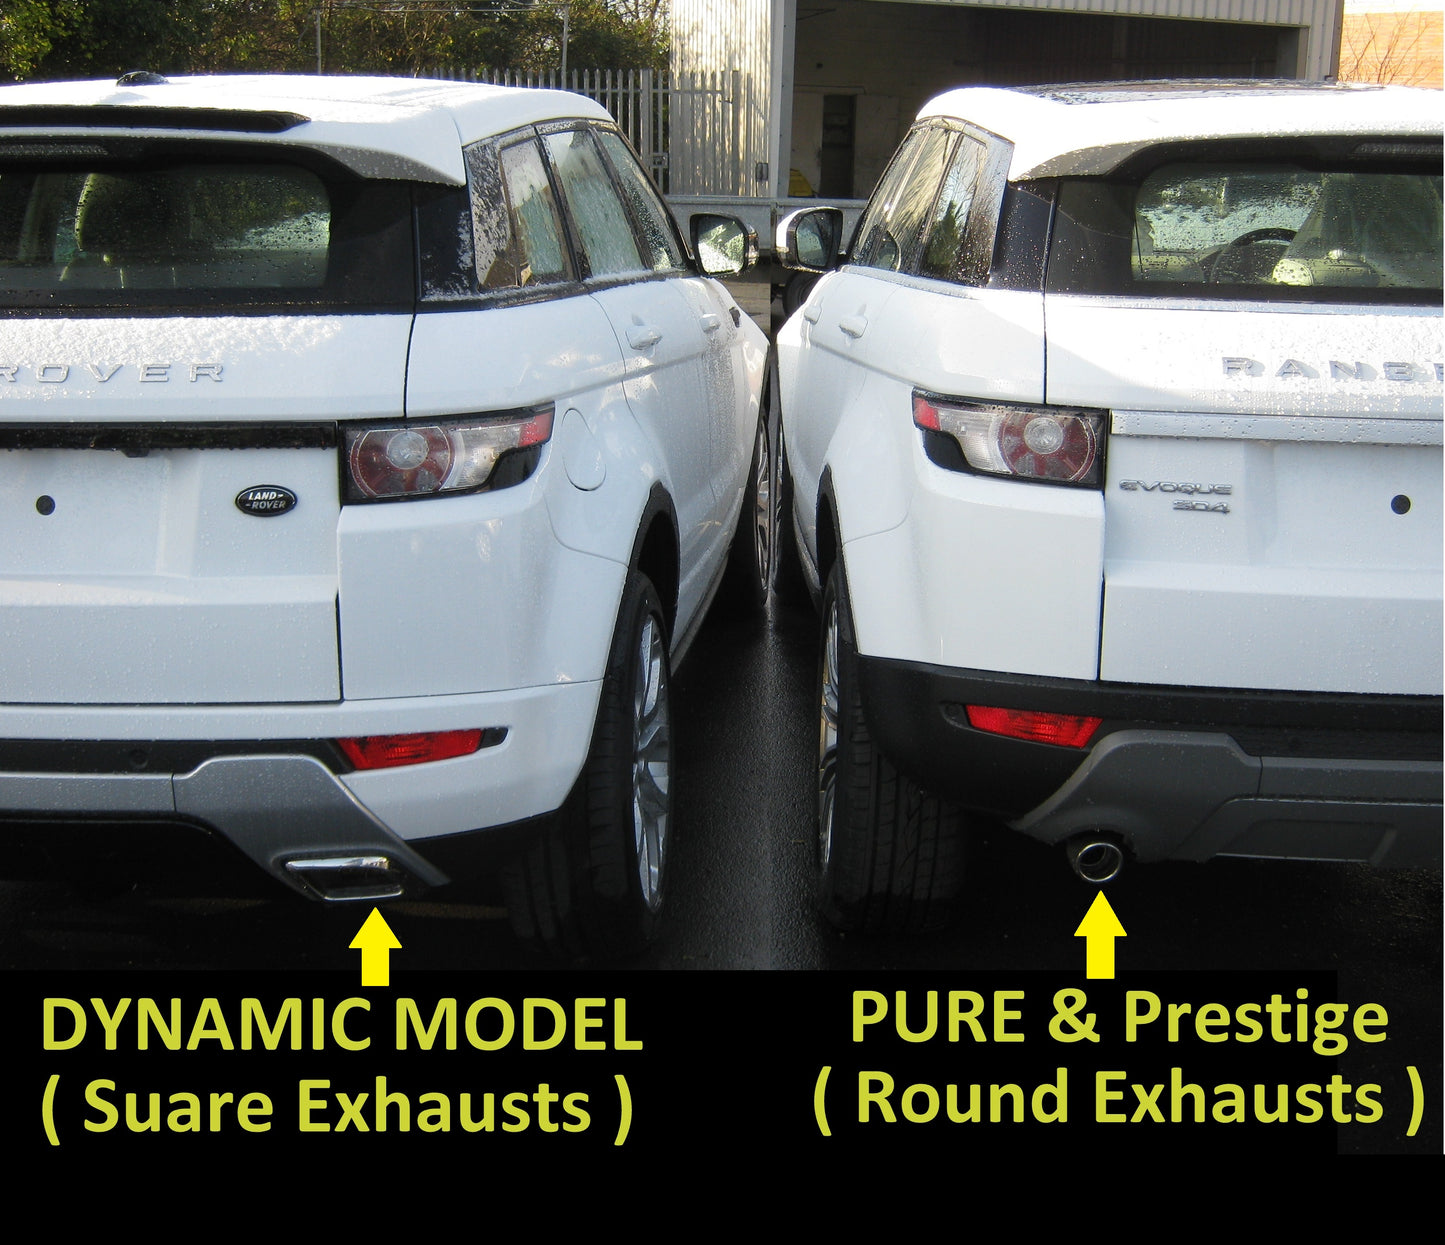 Clearance - Mudflaps (aftermarket) for Rear of Range Rover Evoque Pure/Prestige - Missing fixings and side tabs